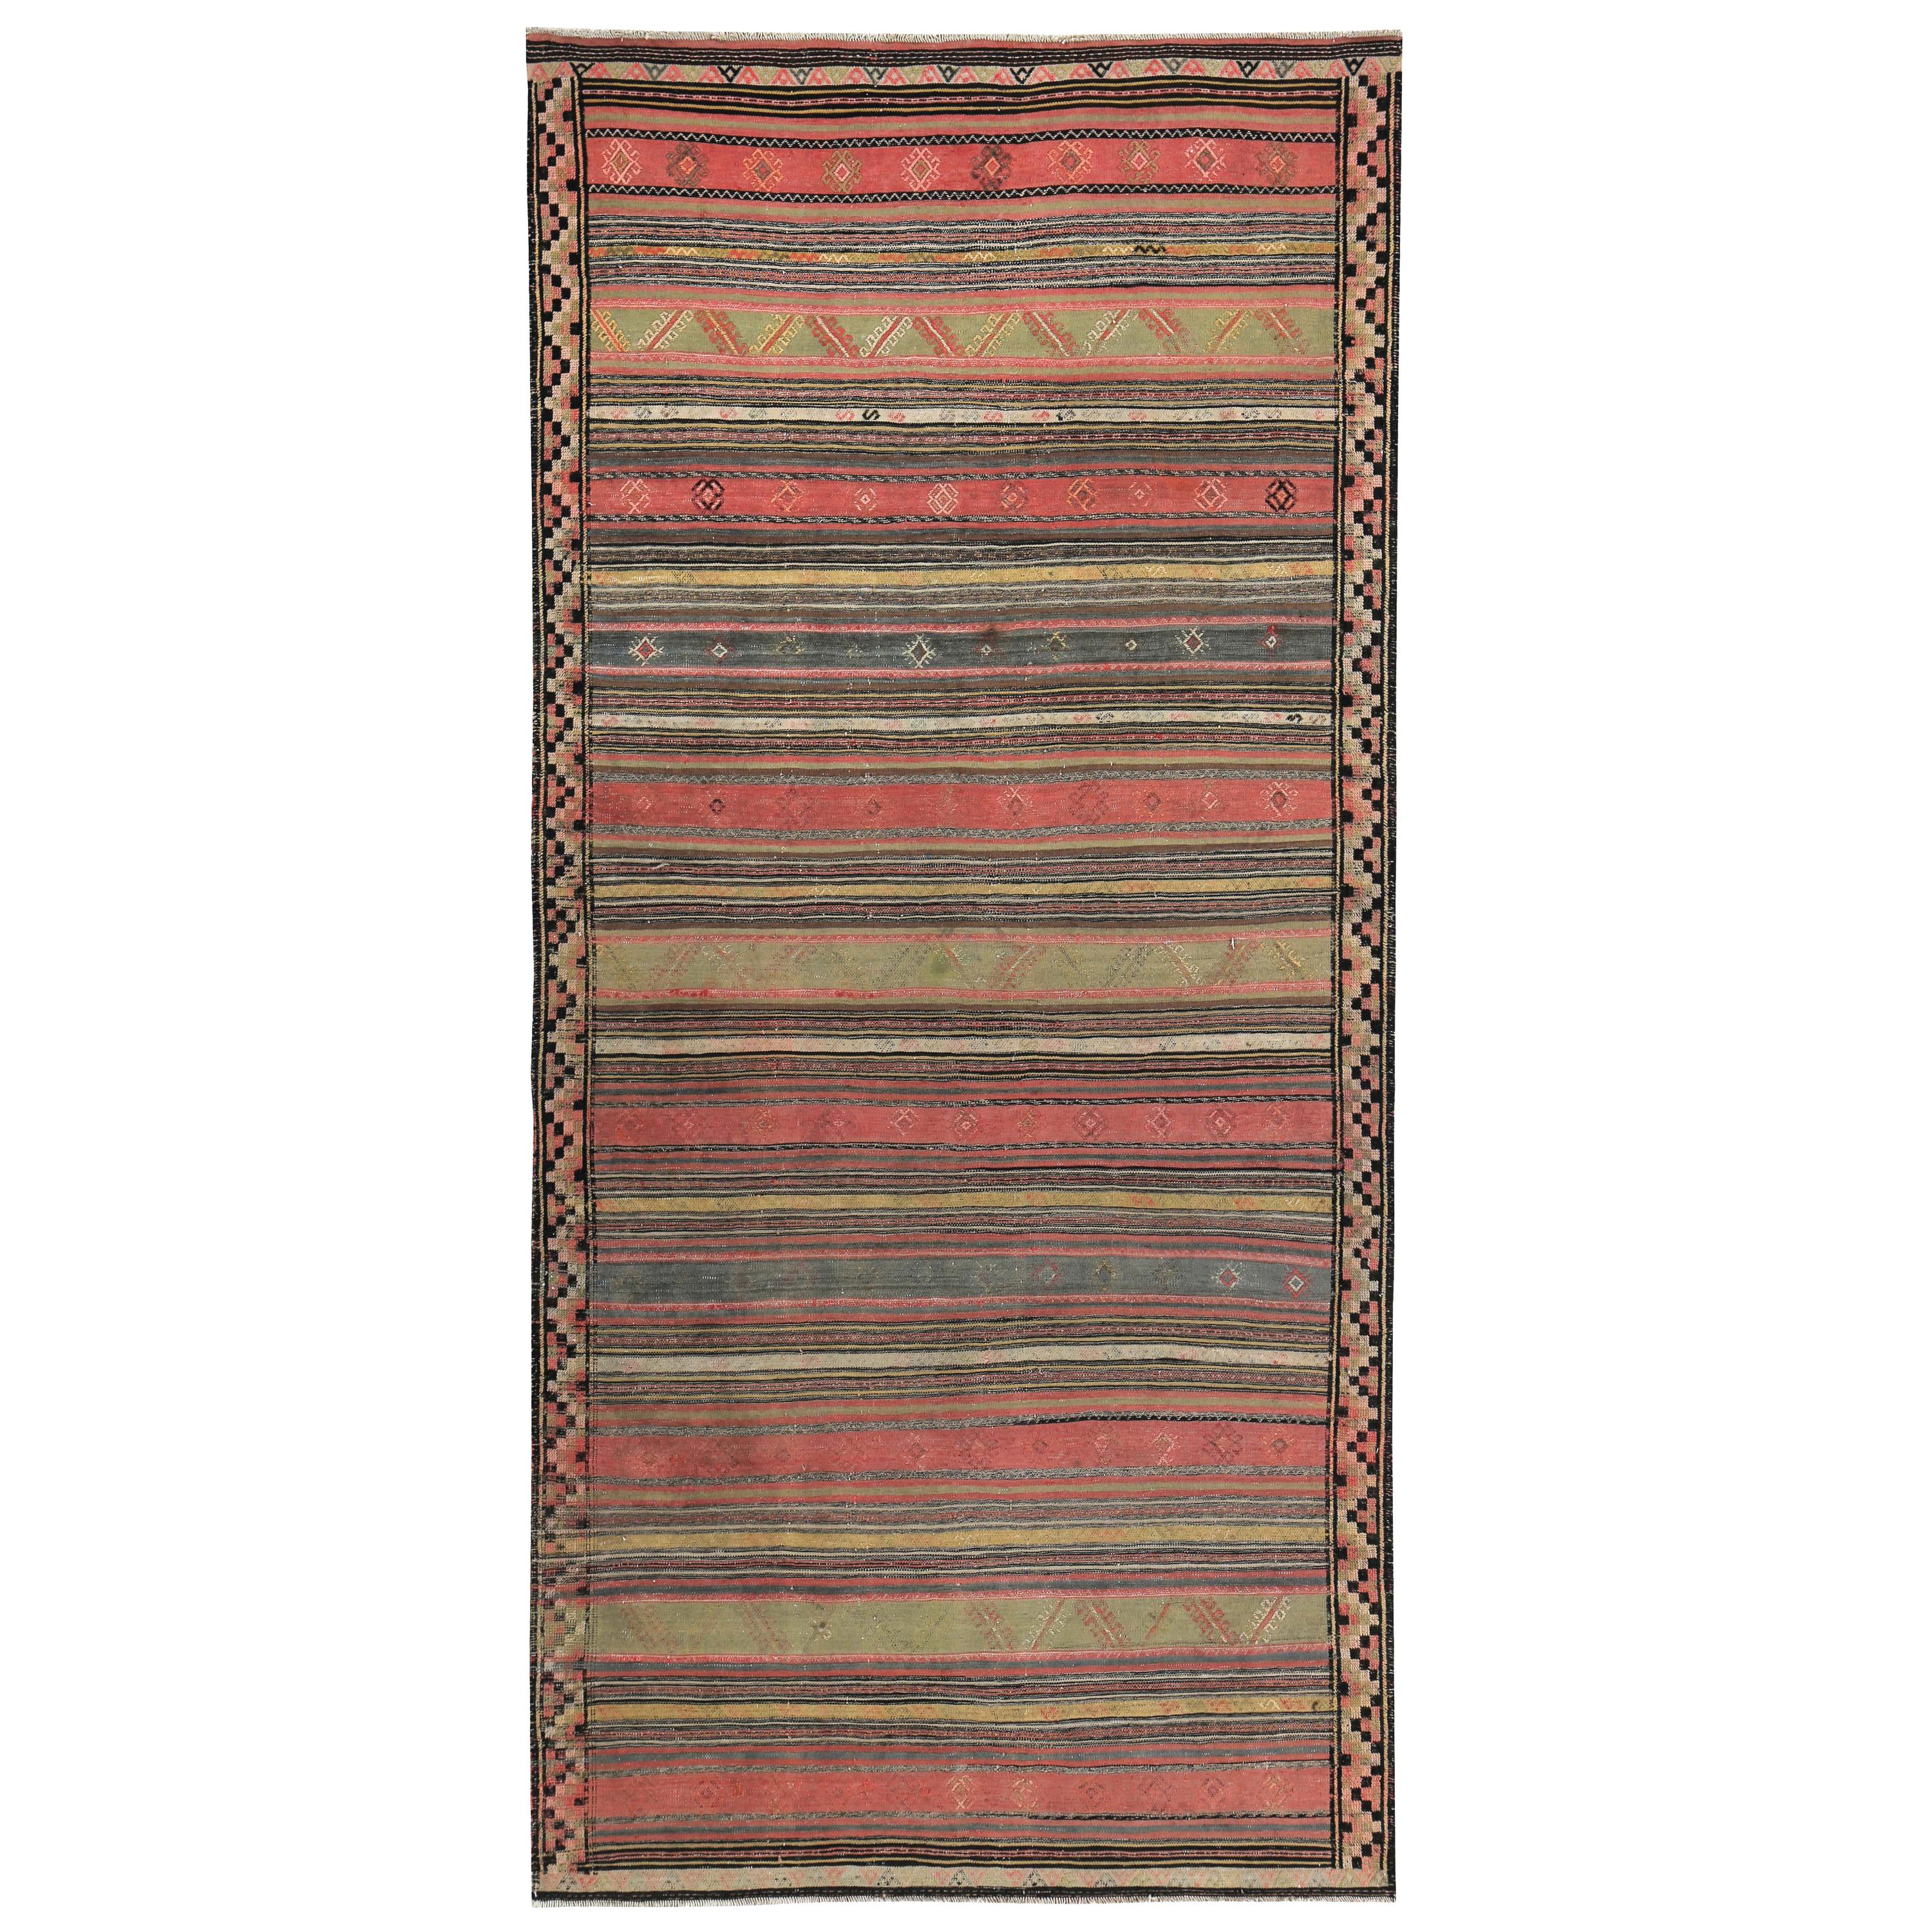 Modern Turkish Kilim Rug with Red, Green and Yellow Stripes